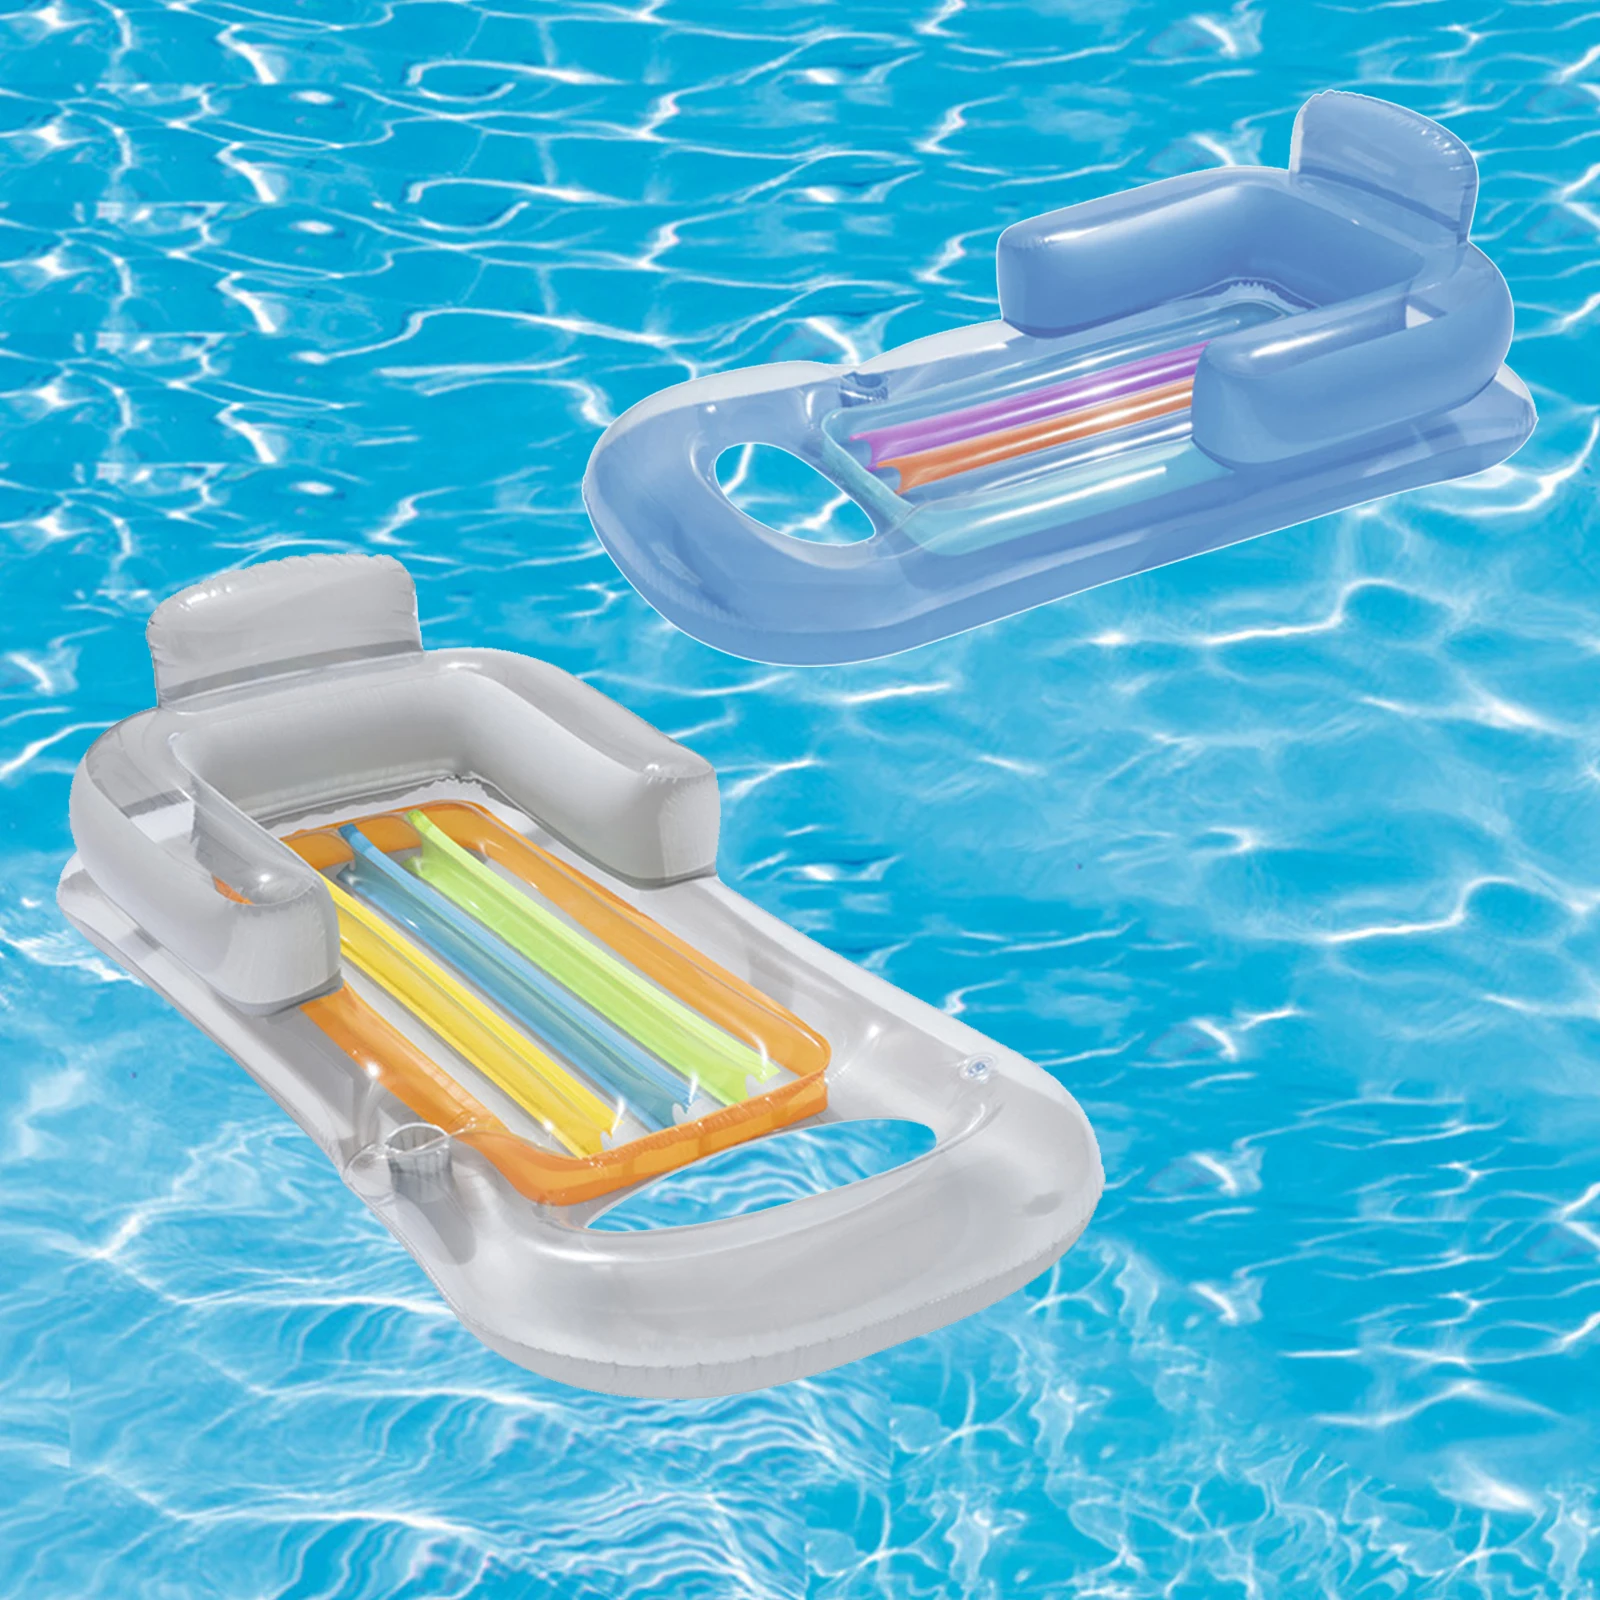 PVC Inflatable Mattress Swiming Pool Air Bed Floating Row Float Sofa Backrest Beach Summer Water Buoyancy Toy Relaxing Chair Mat